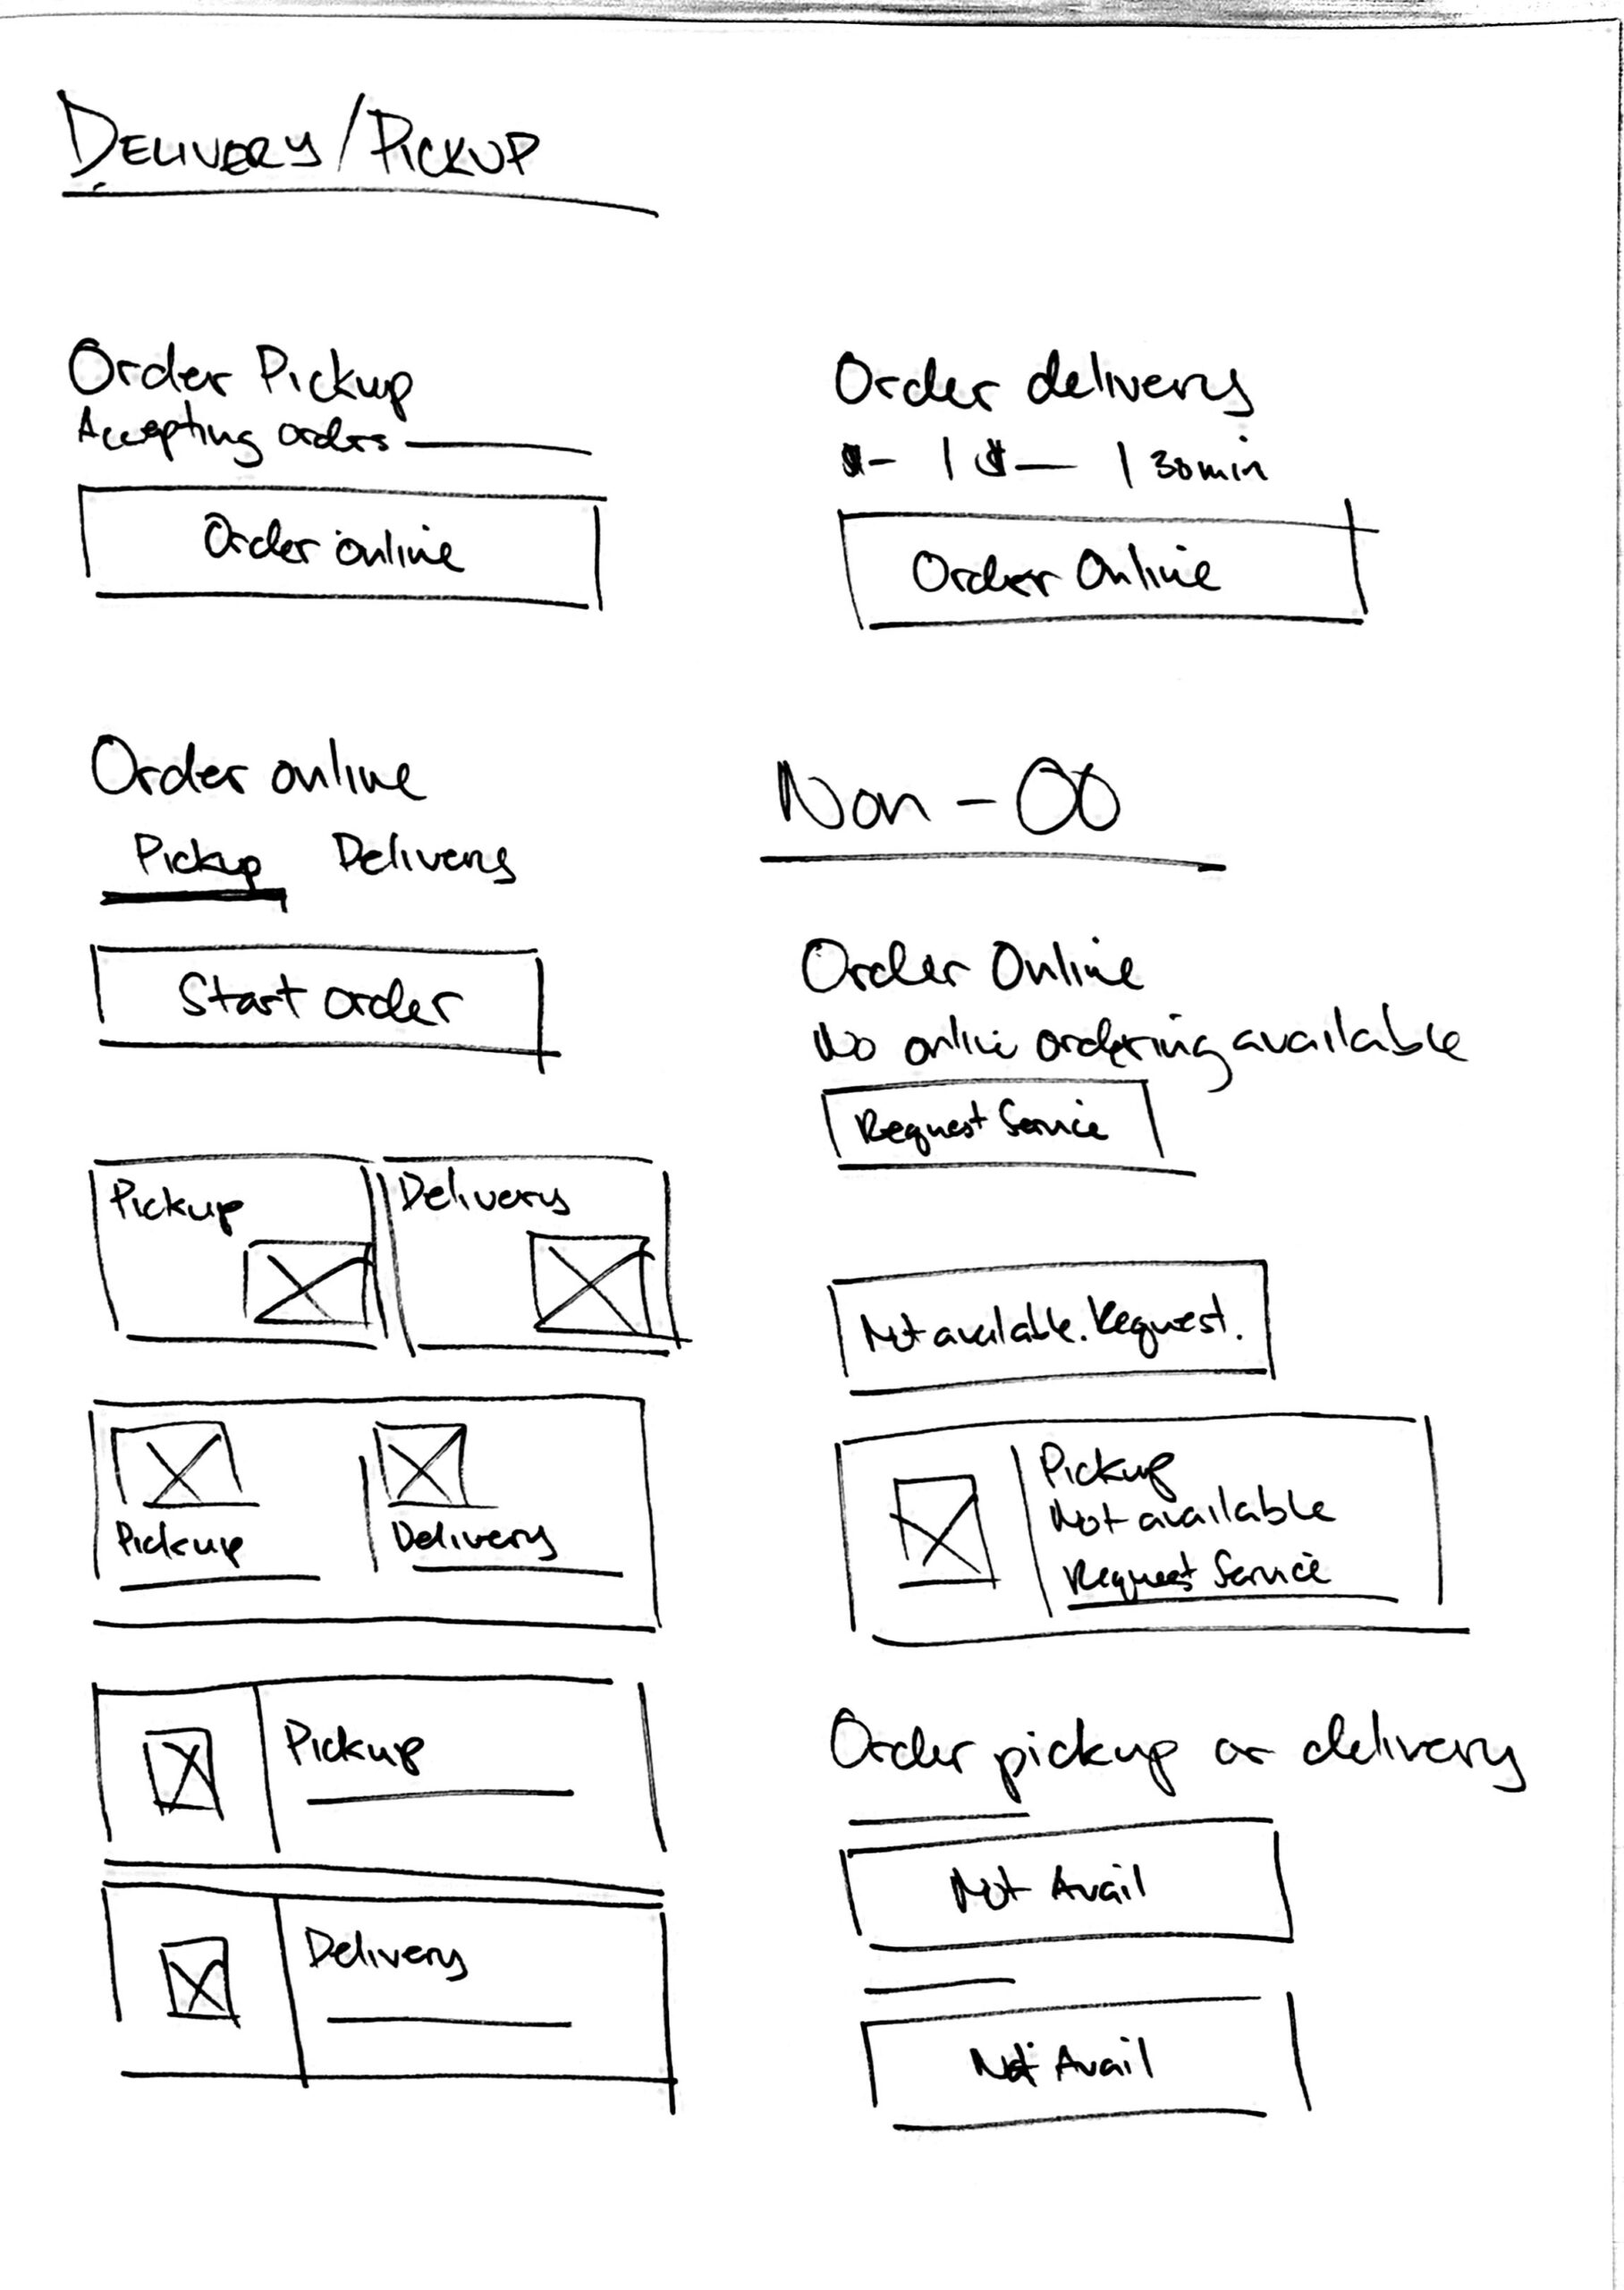 Retailer-overview-sketches-page-2